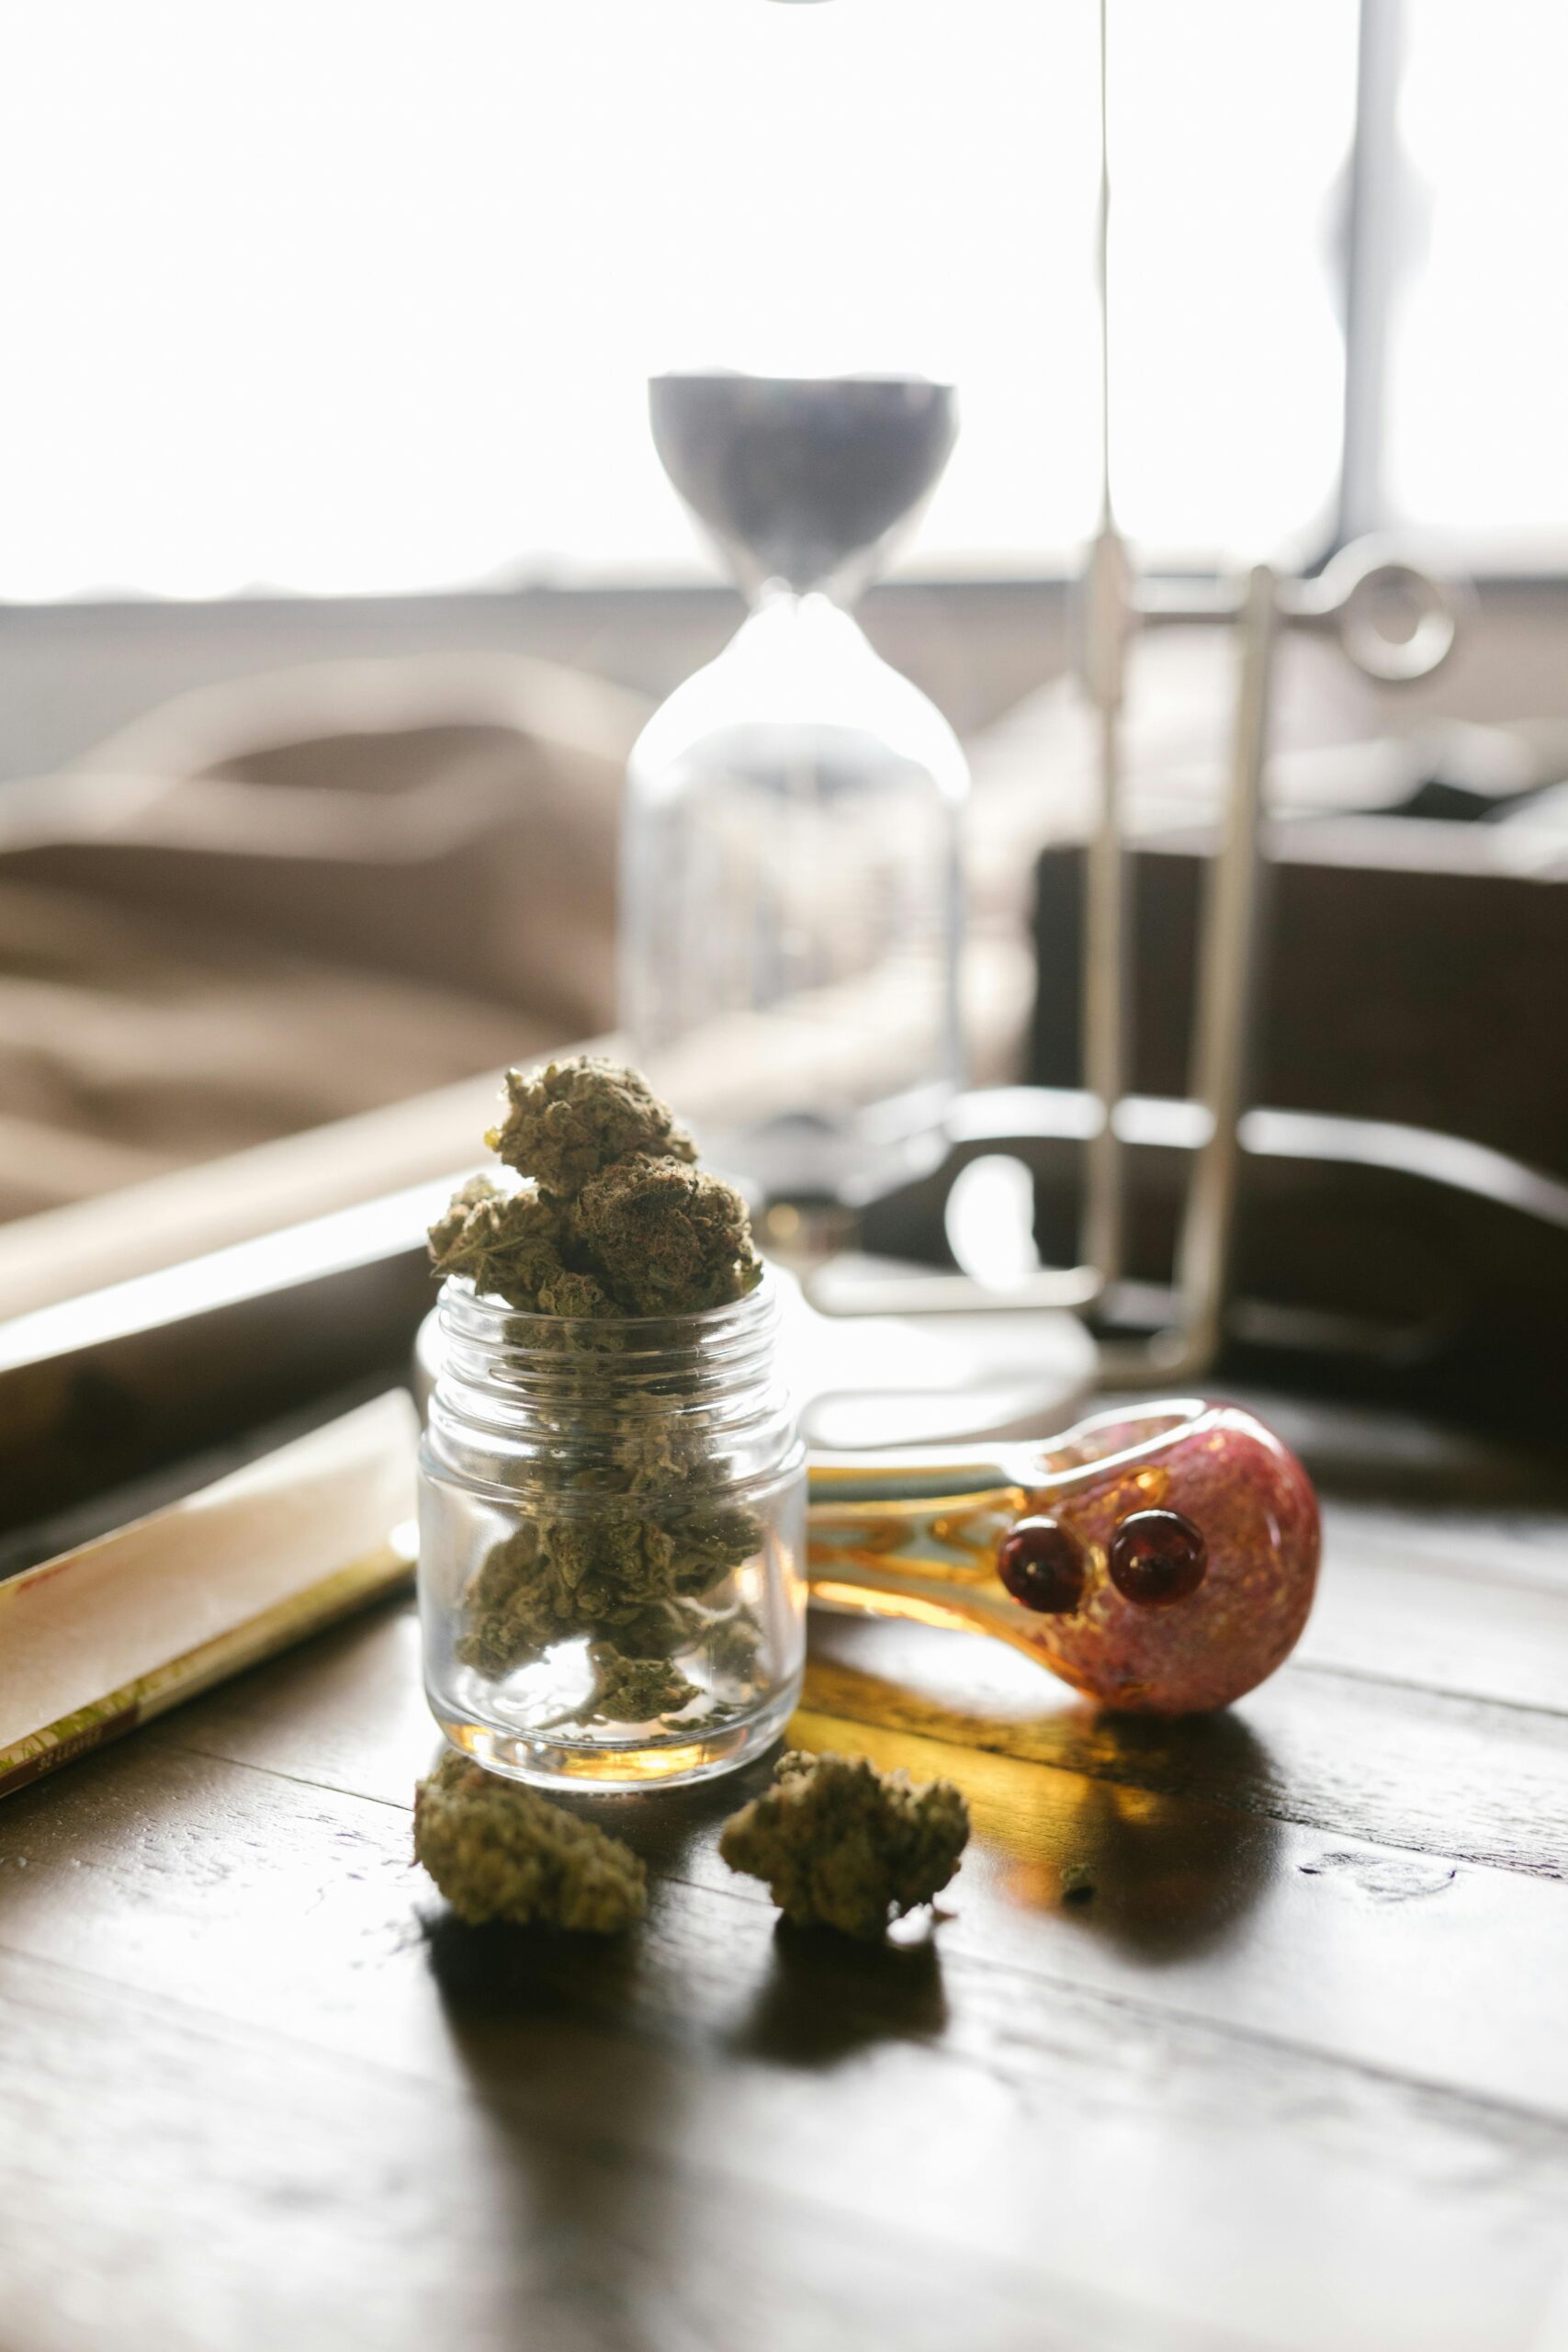 Best Online Dispensaries Have This One Thing in Common